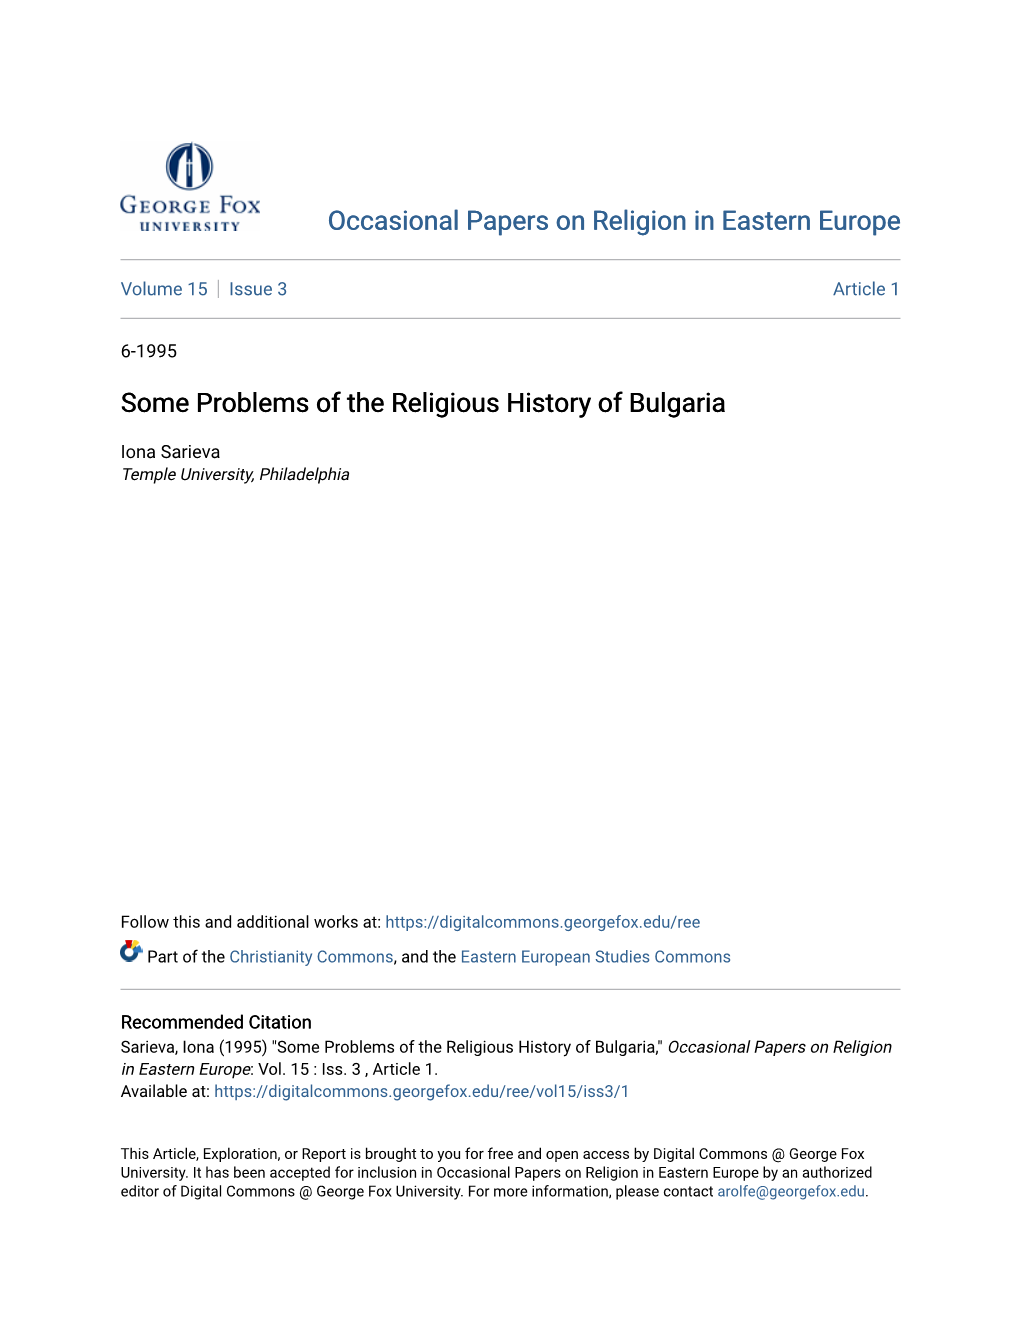 Some Problems of the Religious History of Bulgaria